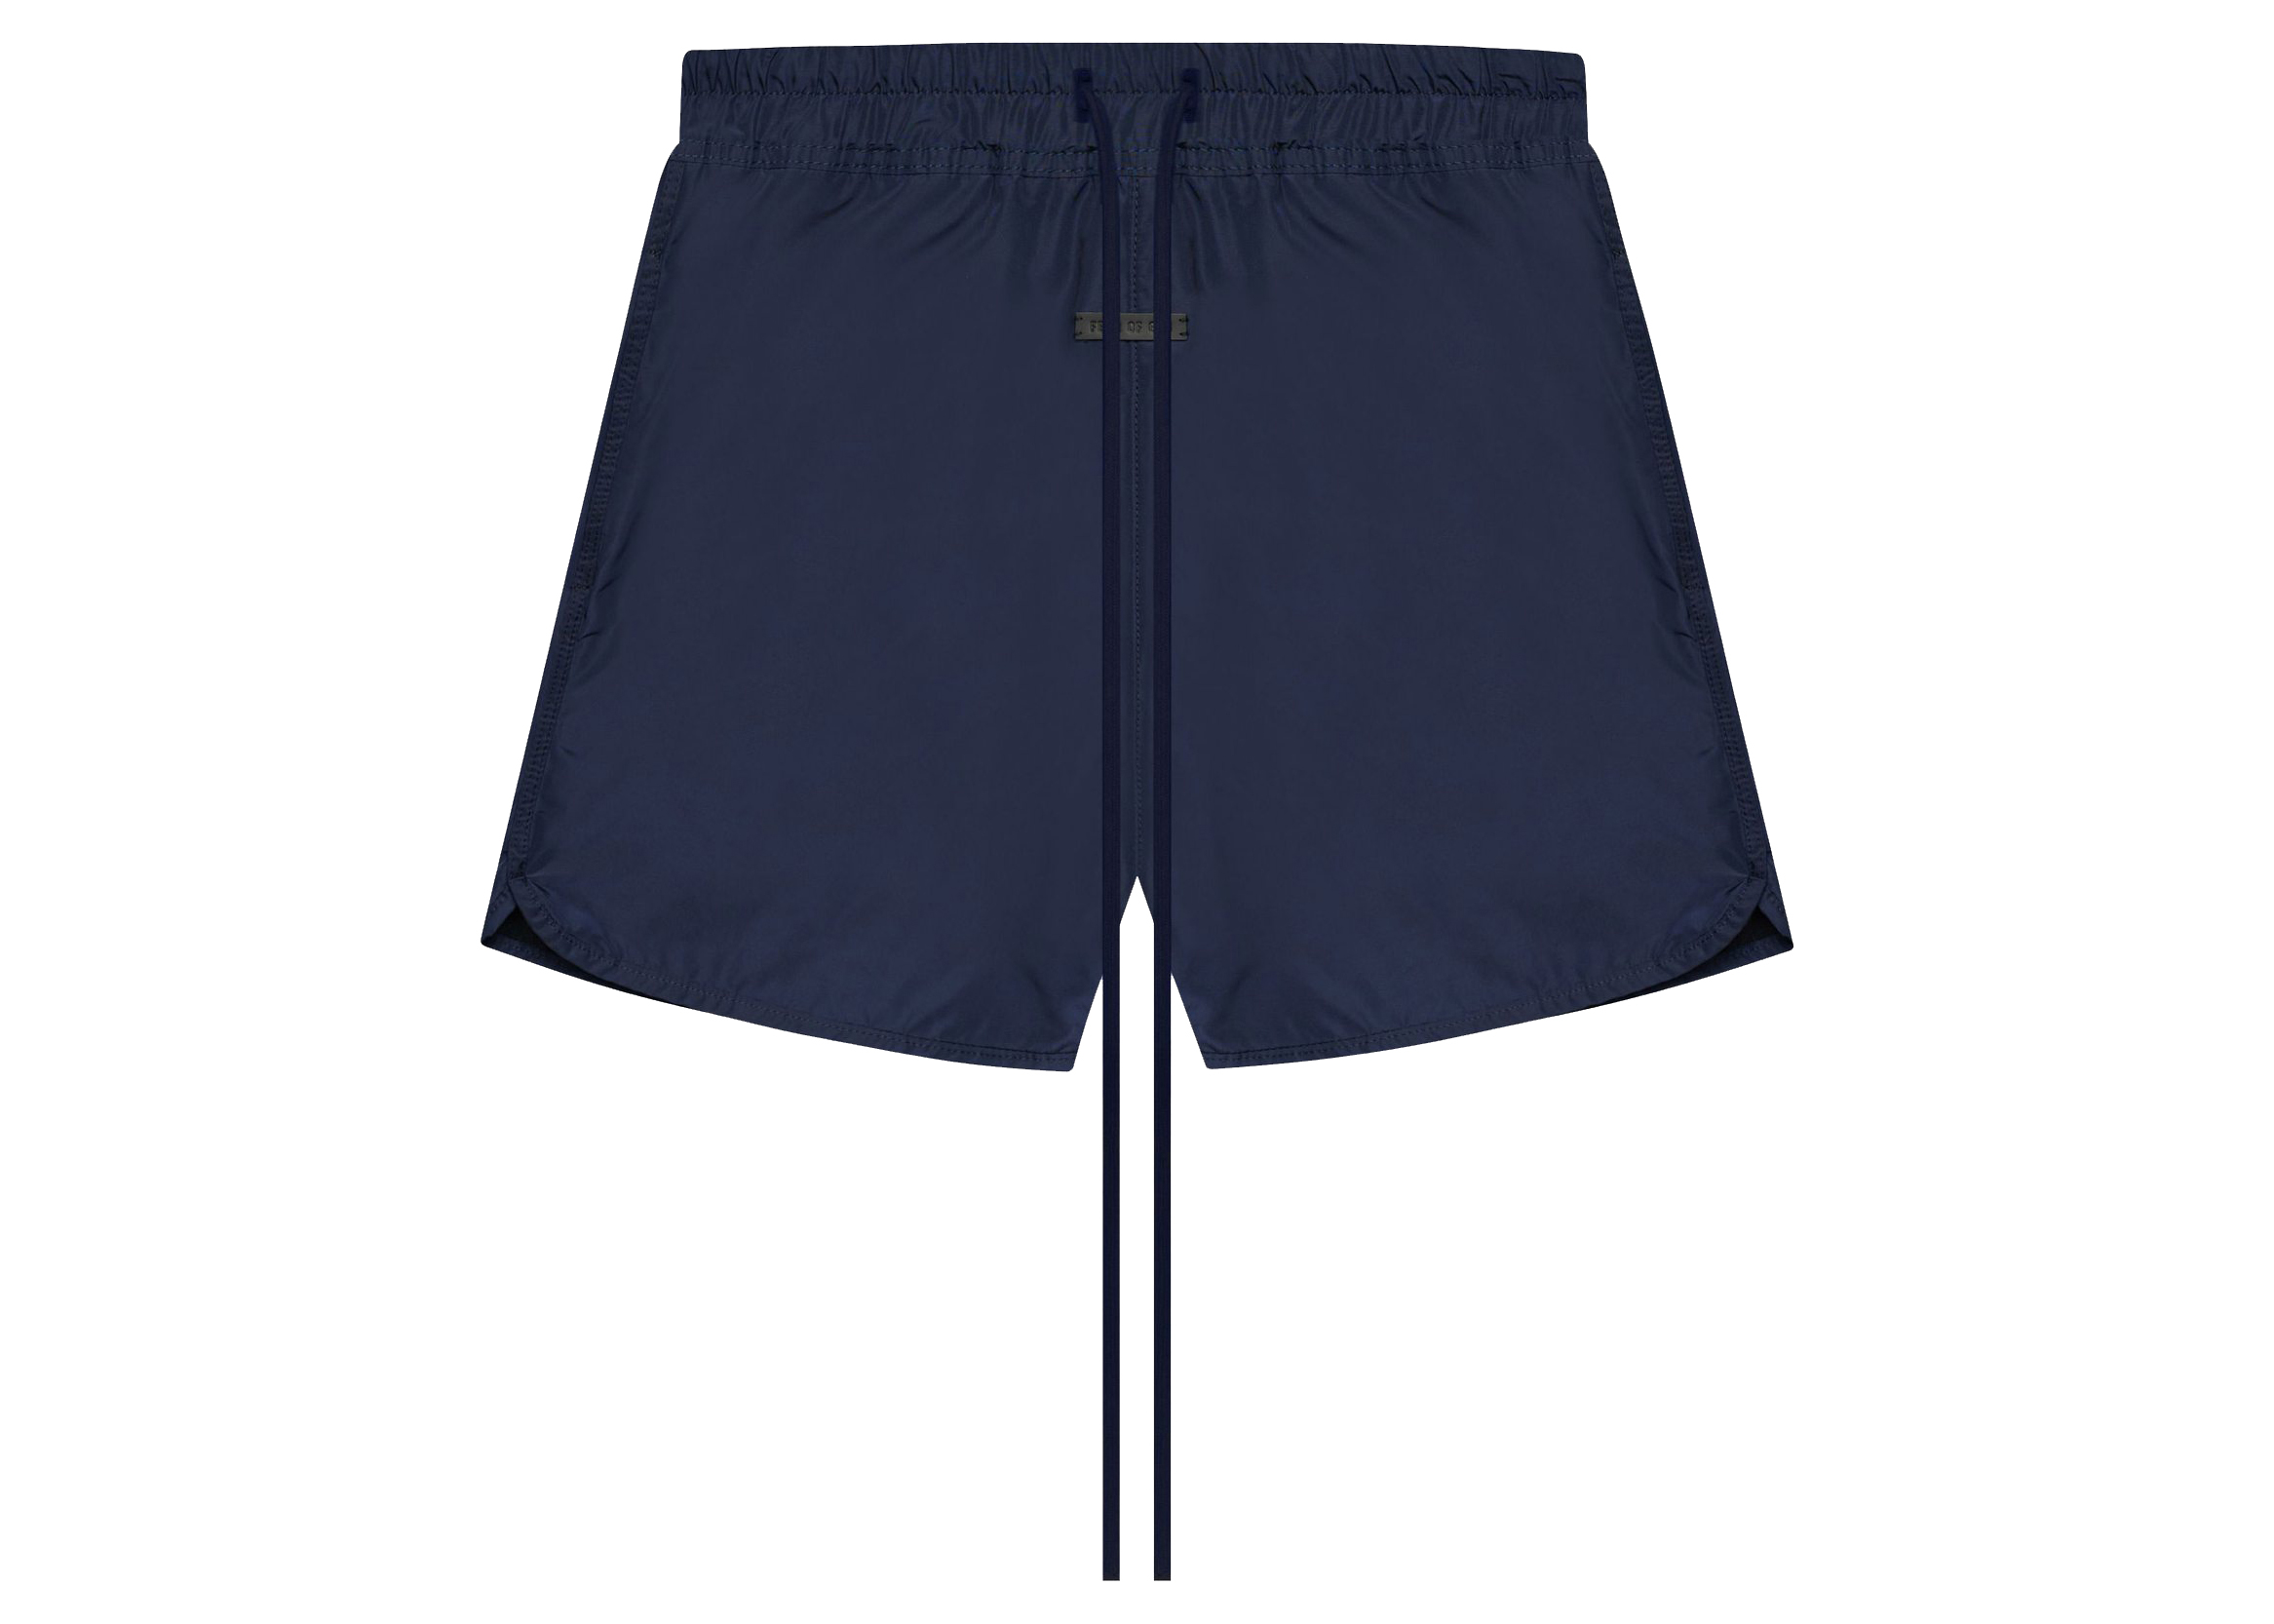 Fear of God Seventh Collection Track Short Navy Men's - SEVENTH 